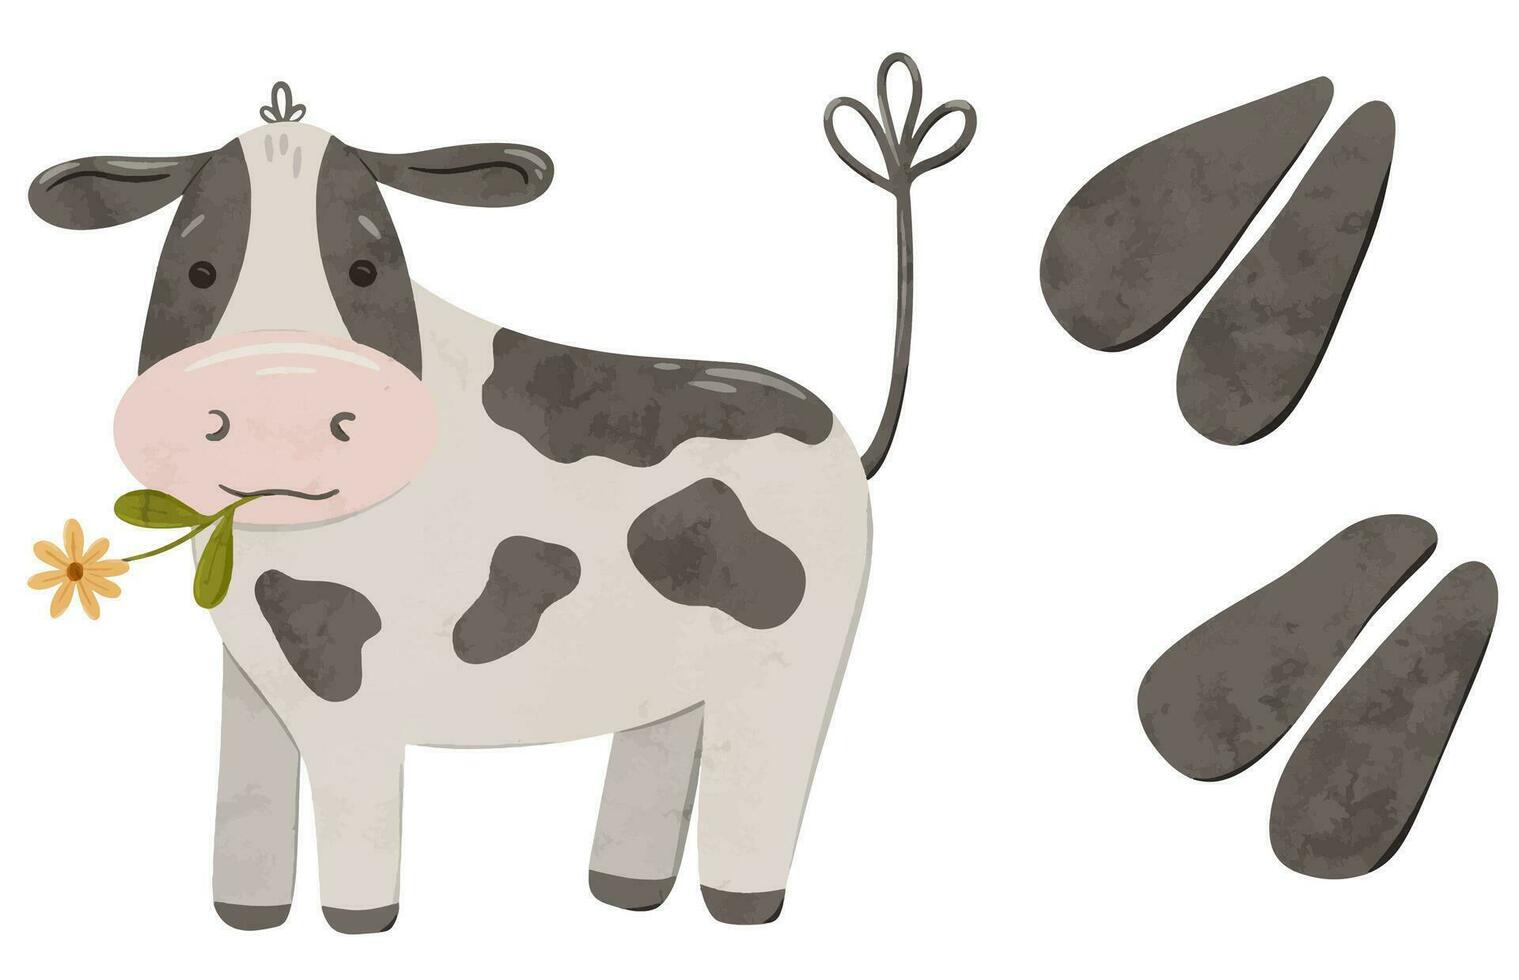 Cute cow with a yellow flower in her mouth and footprint. Digital hand drawn illustration with little farm animal for textile design, education, baby shower, children prints. vector